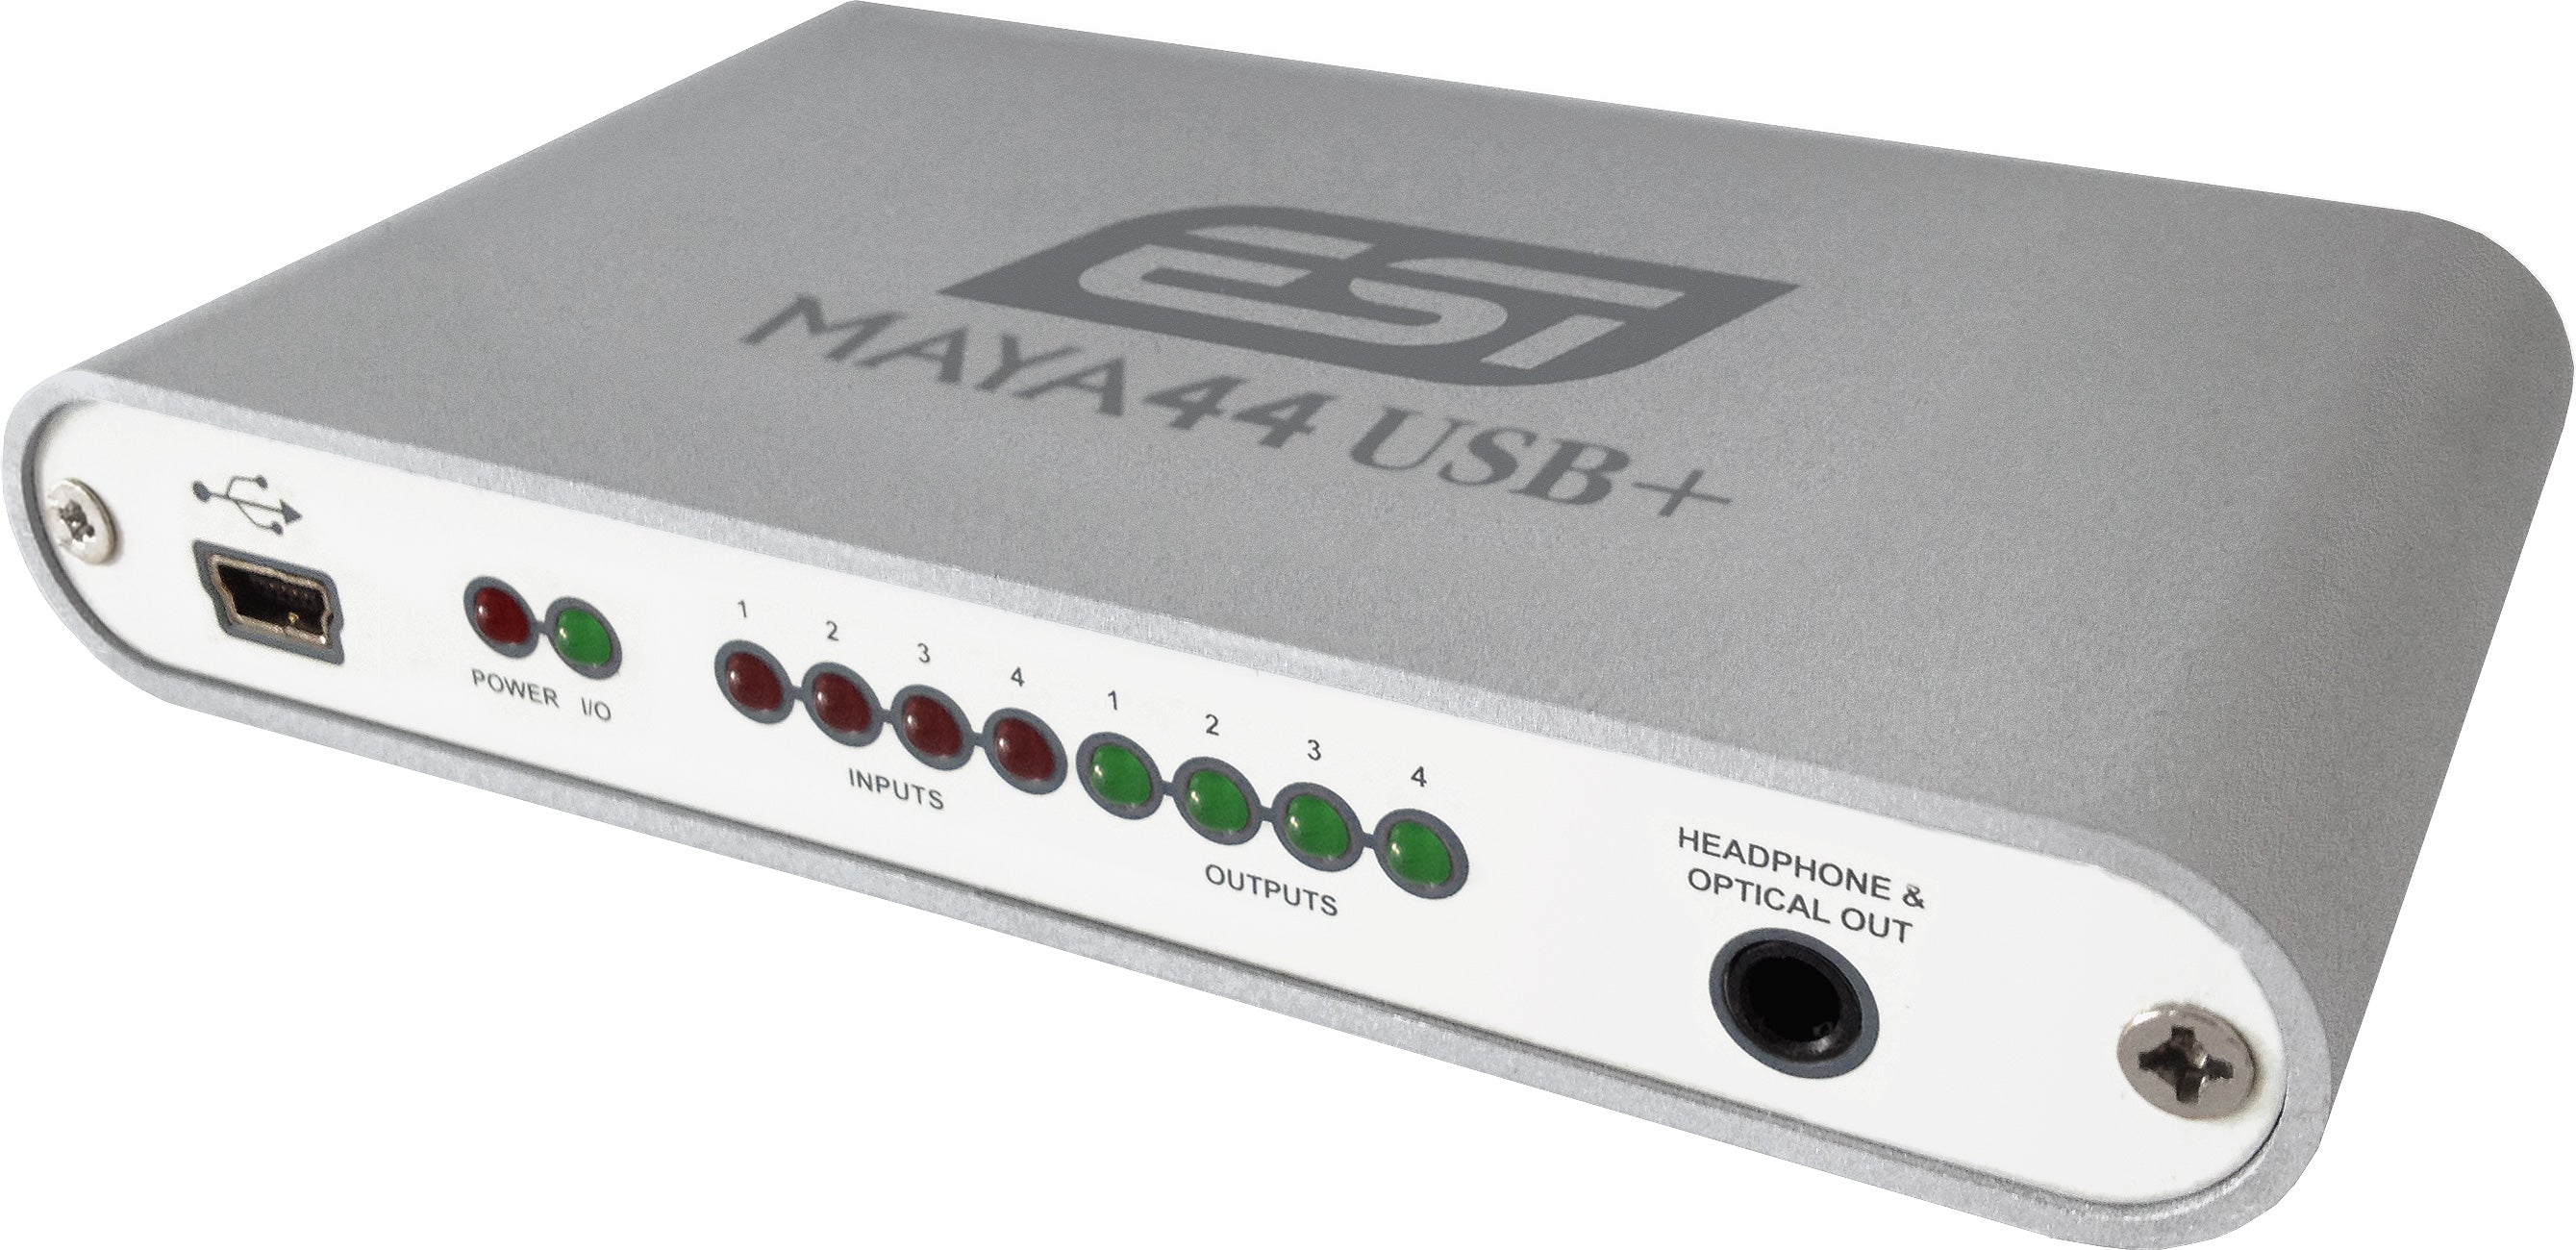 ESI Audio MAYA44 USB+ 4 In / 4 Out Audio Interface - Silver